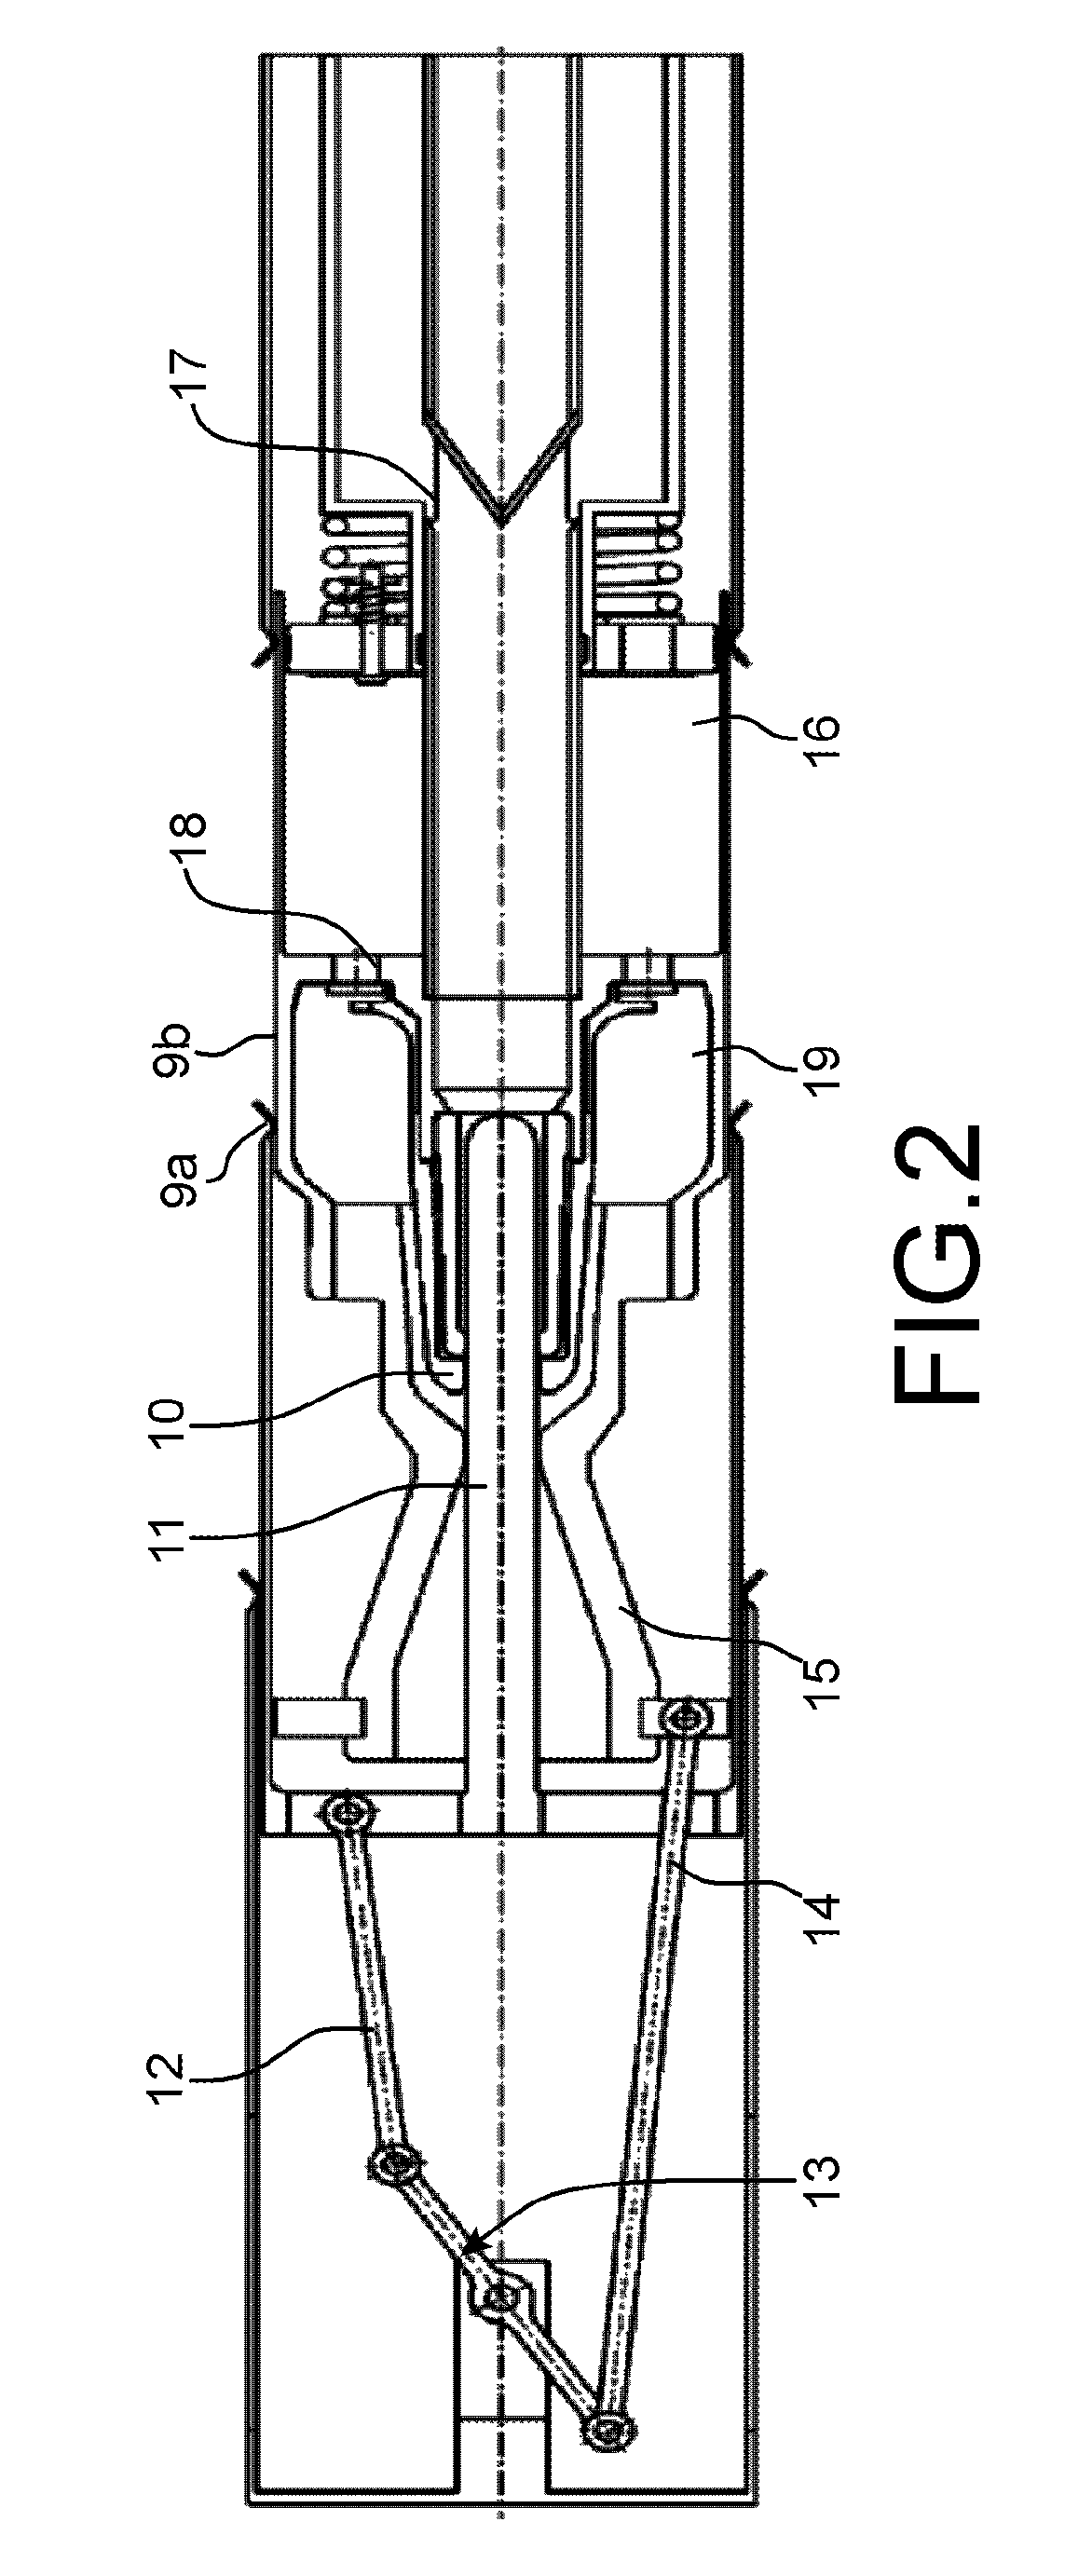 Gas-insulated medium or high-voltage electrical apparatus including carbon dioxide, oxygen, and heptafluoro-isobutyronitrile